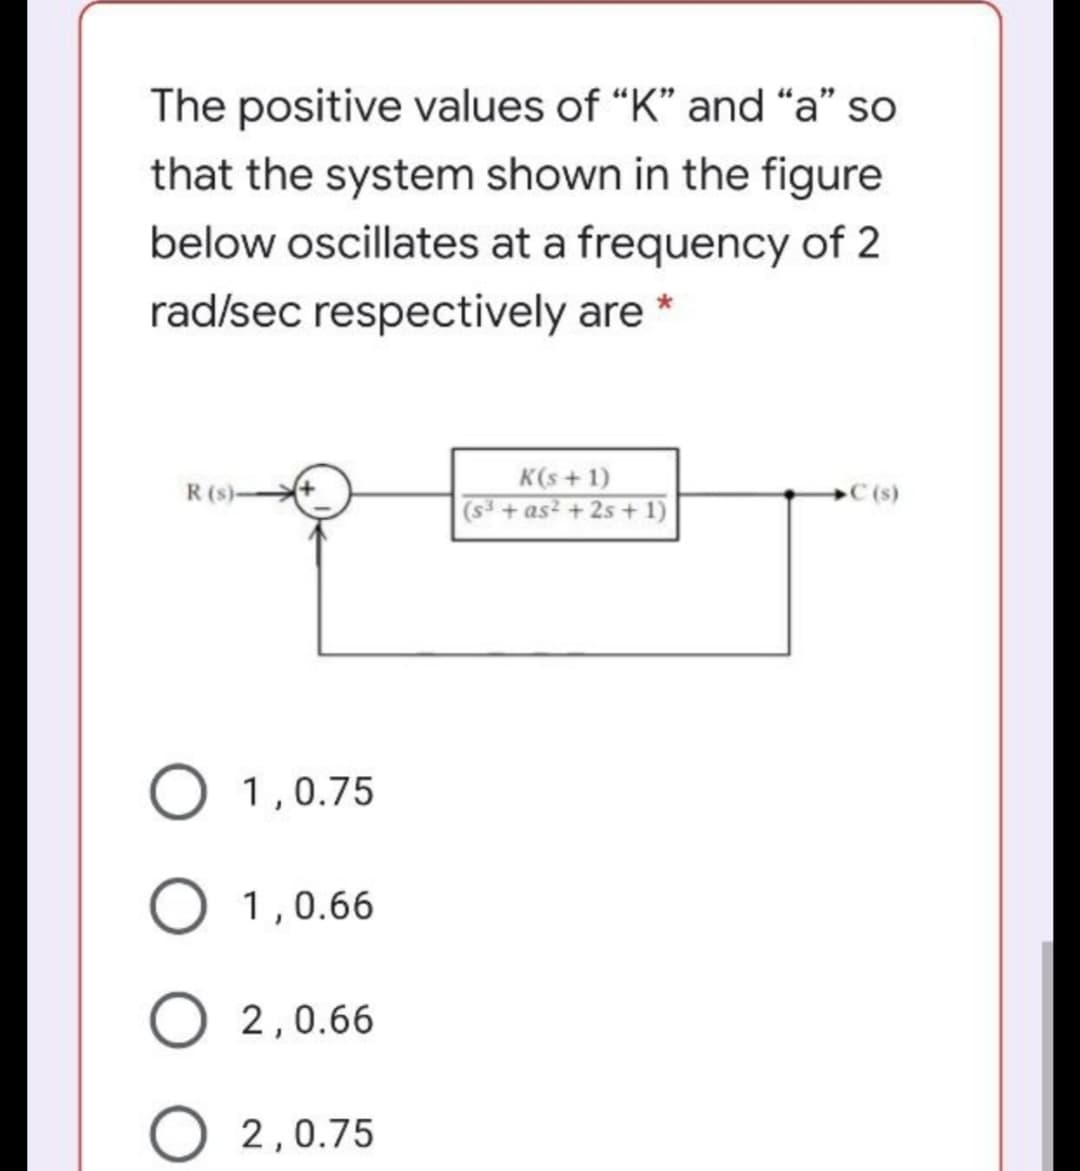 The positive values of "K" and "a" so
that the system shown in the figure
below oscillates at a frequency of 2
rad/sec respectively are
K(s+ 1)
R (s)-
C(s)
(s + as? + 2s + 1)
O 1,0.75
O 1,0.66
2,0.66
2,0.75
